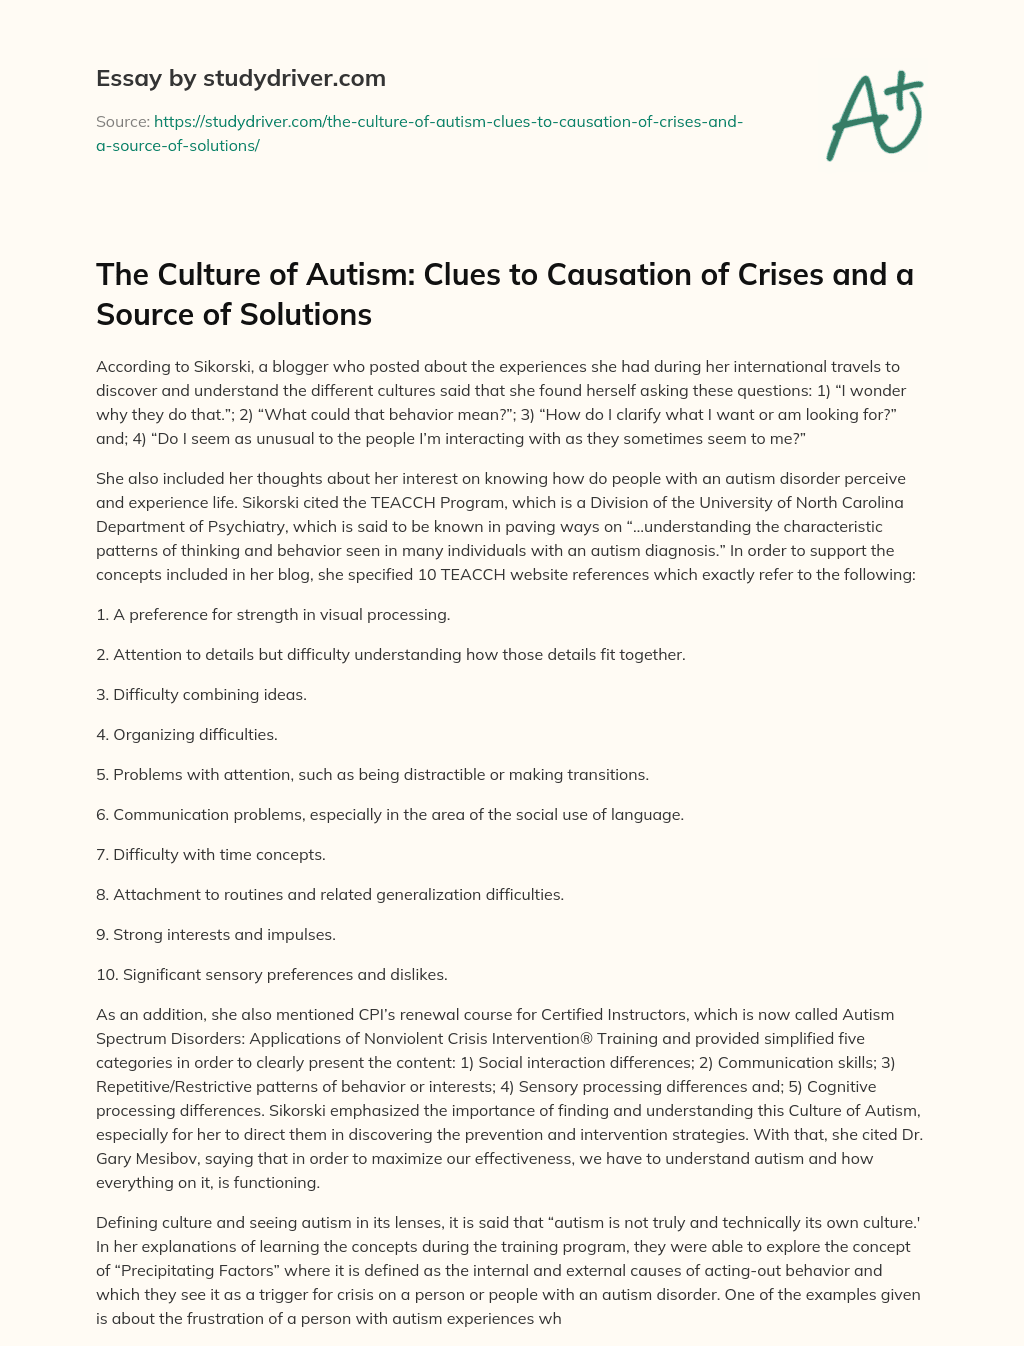 The Culture of Autism: Clues to Causation of Crises and a Source of Solutions essay